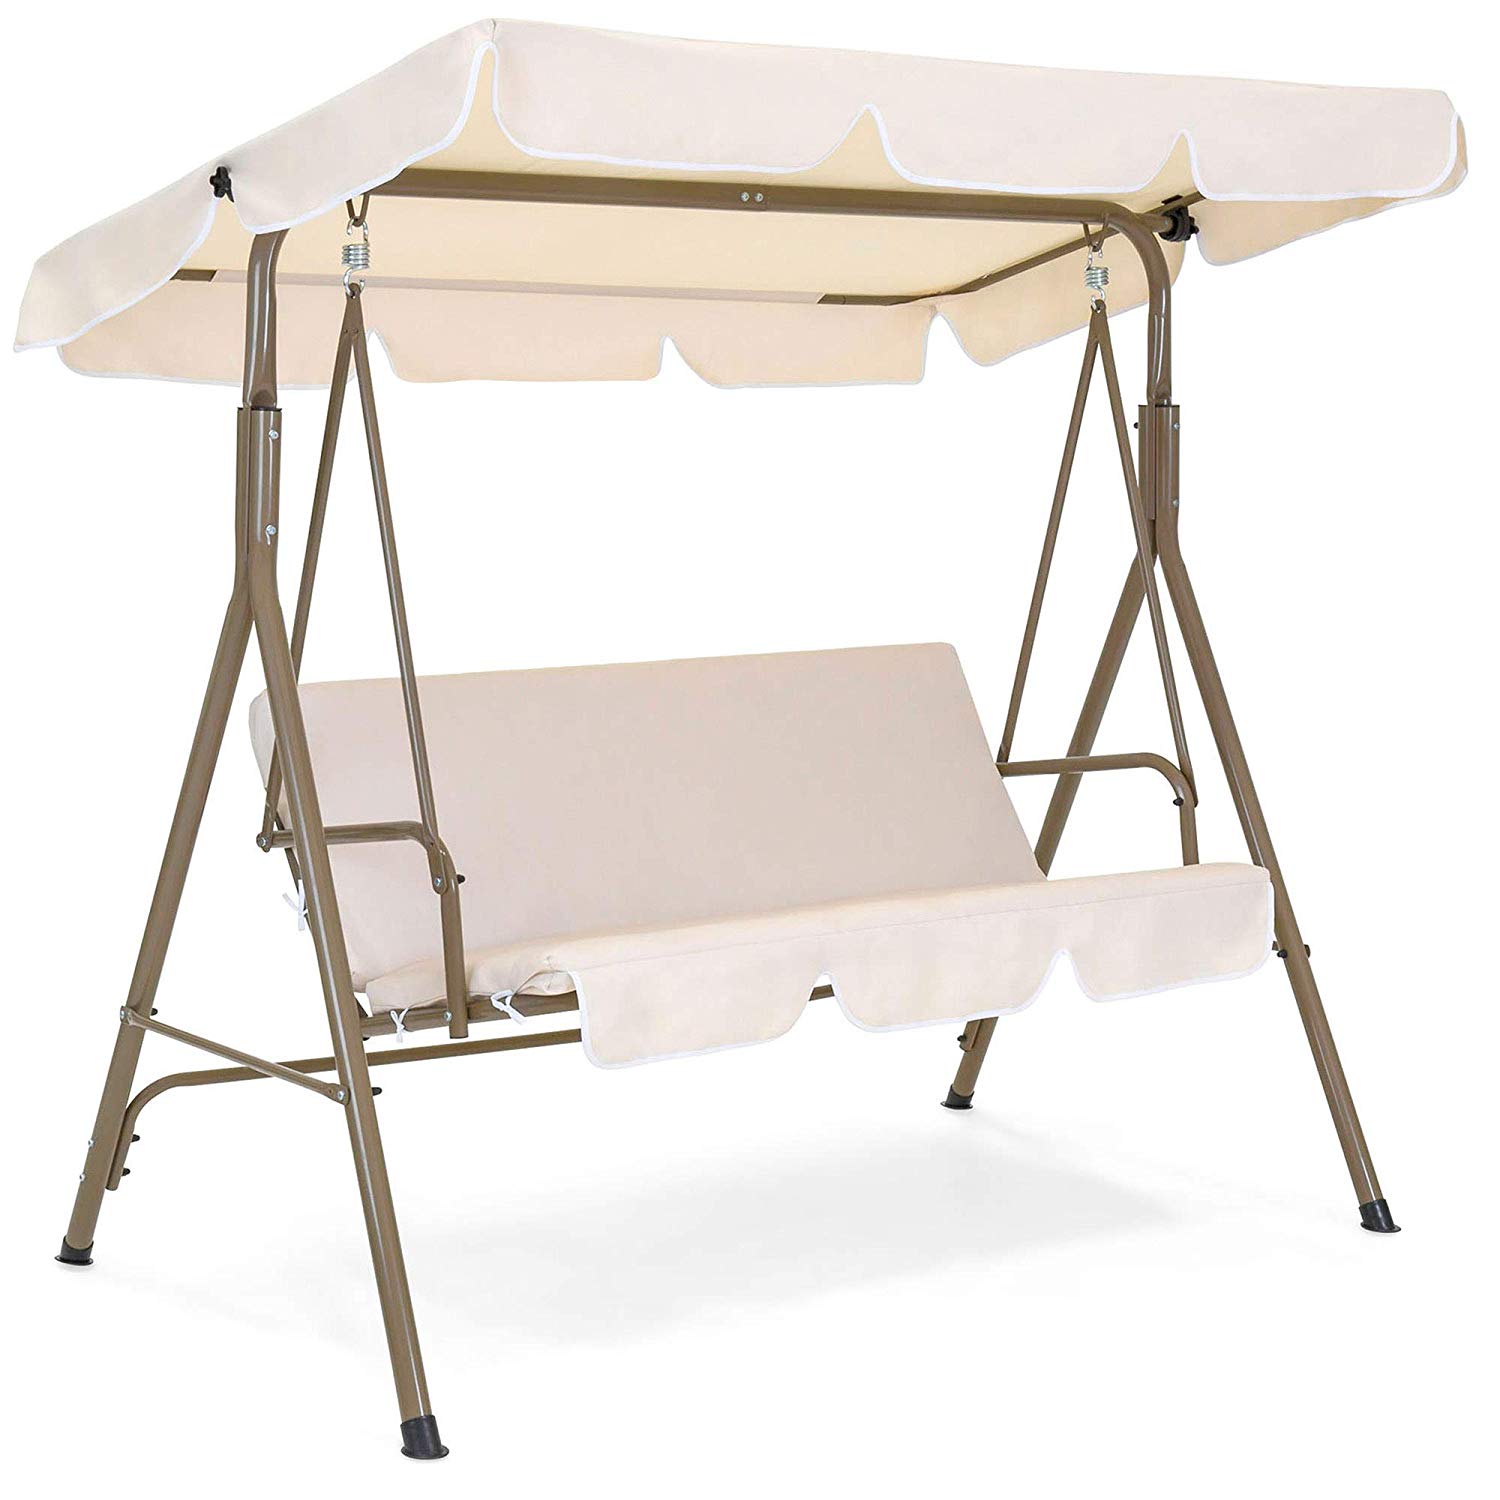 2-person patio swing with canopy and large seat